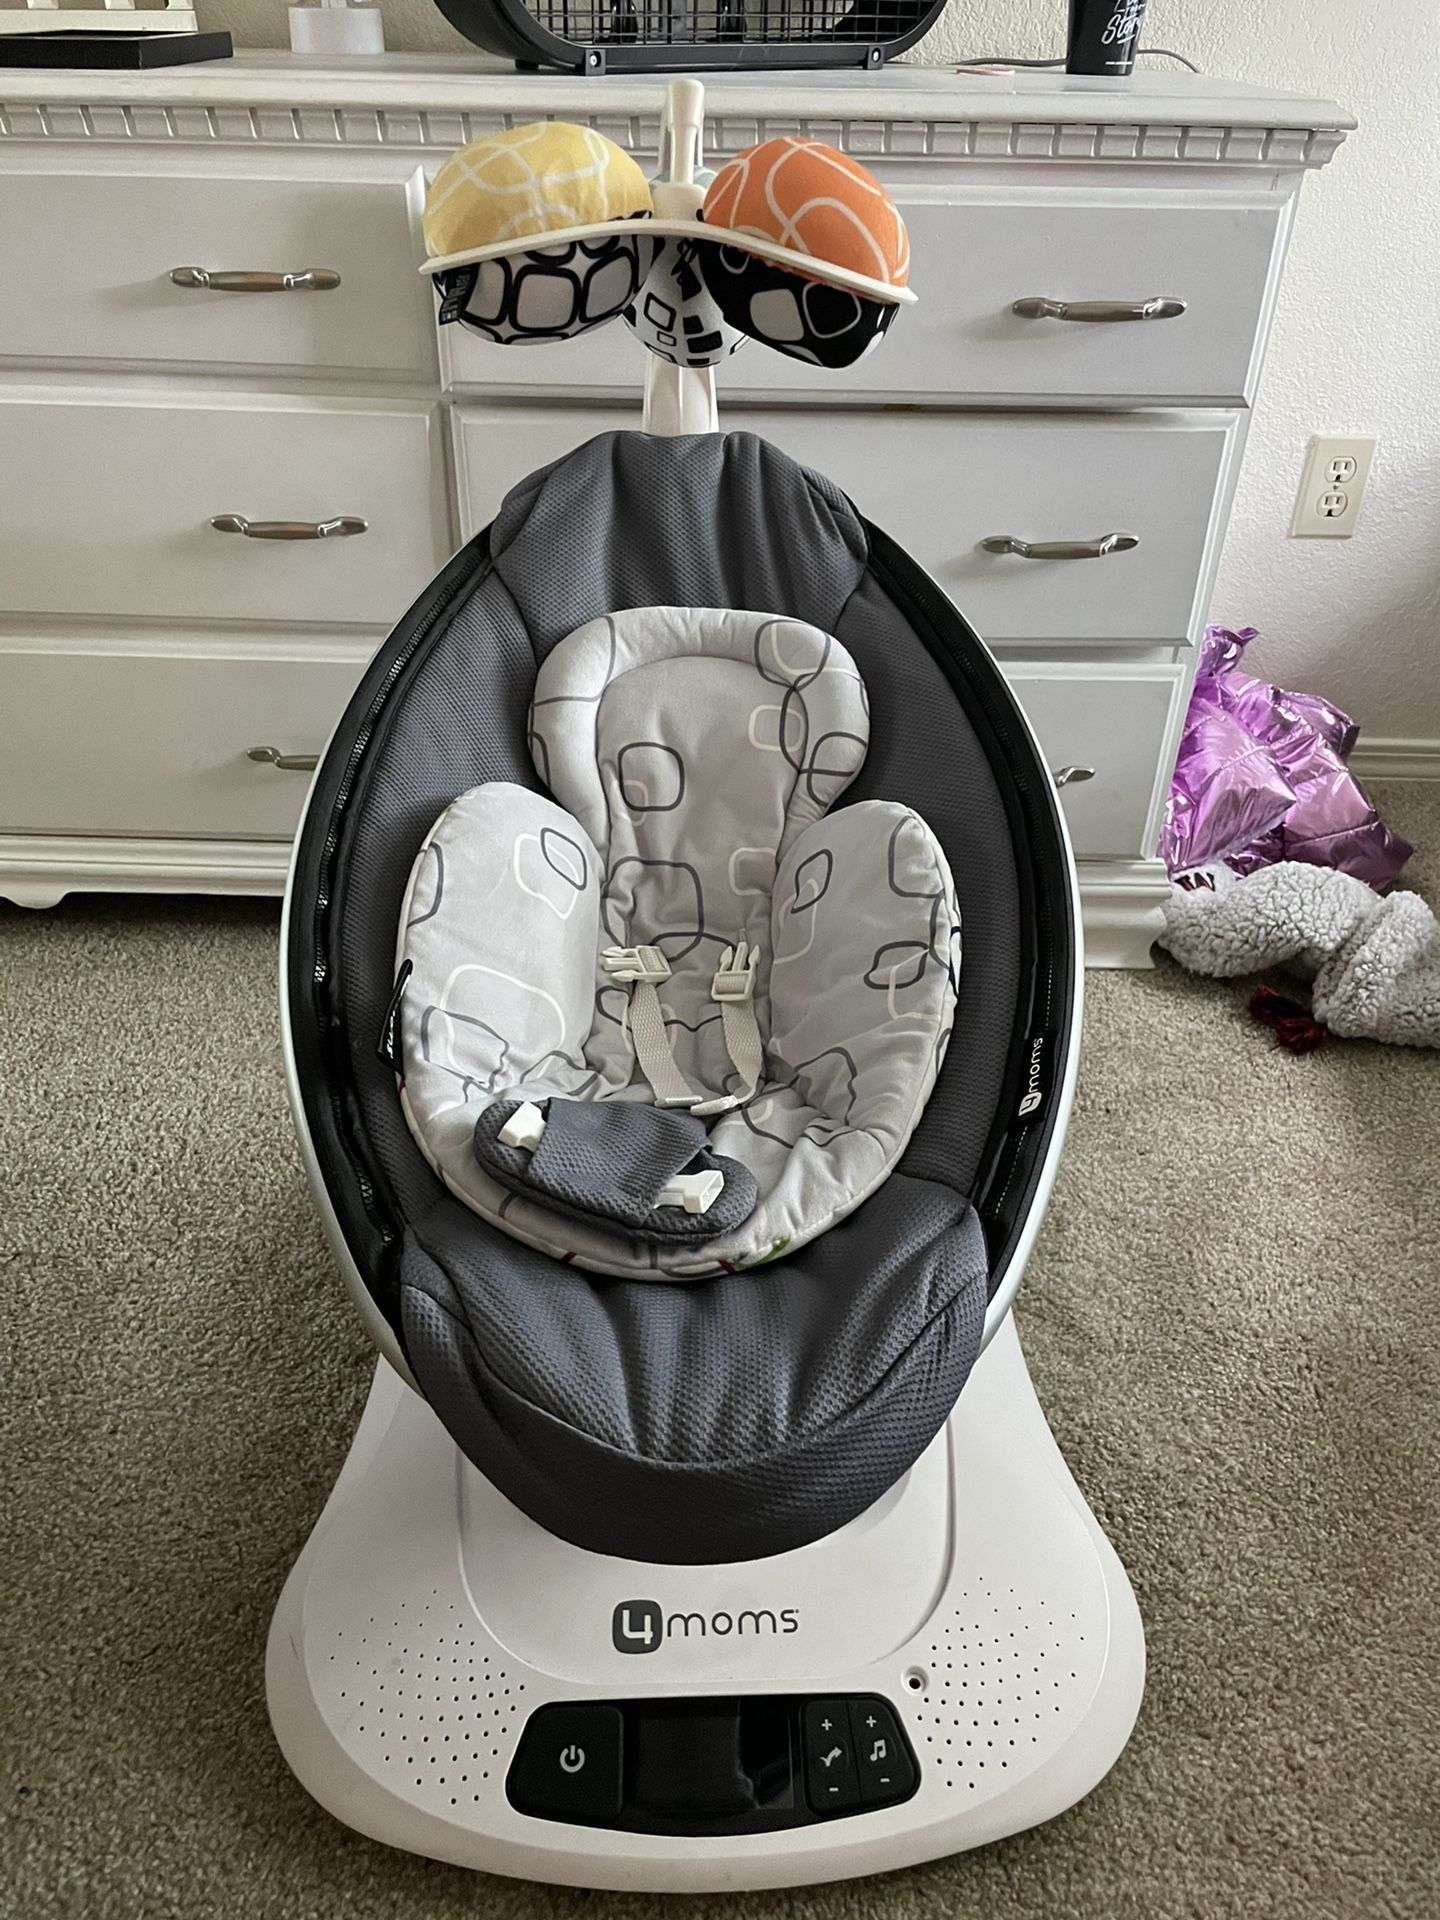 4moms mamaRoo Swing for Sale in Clackamas, OR - OfferUp